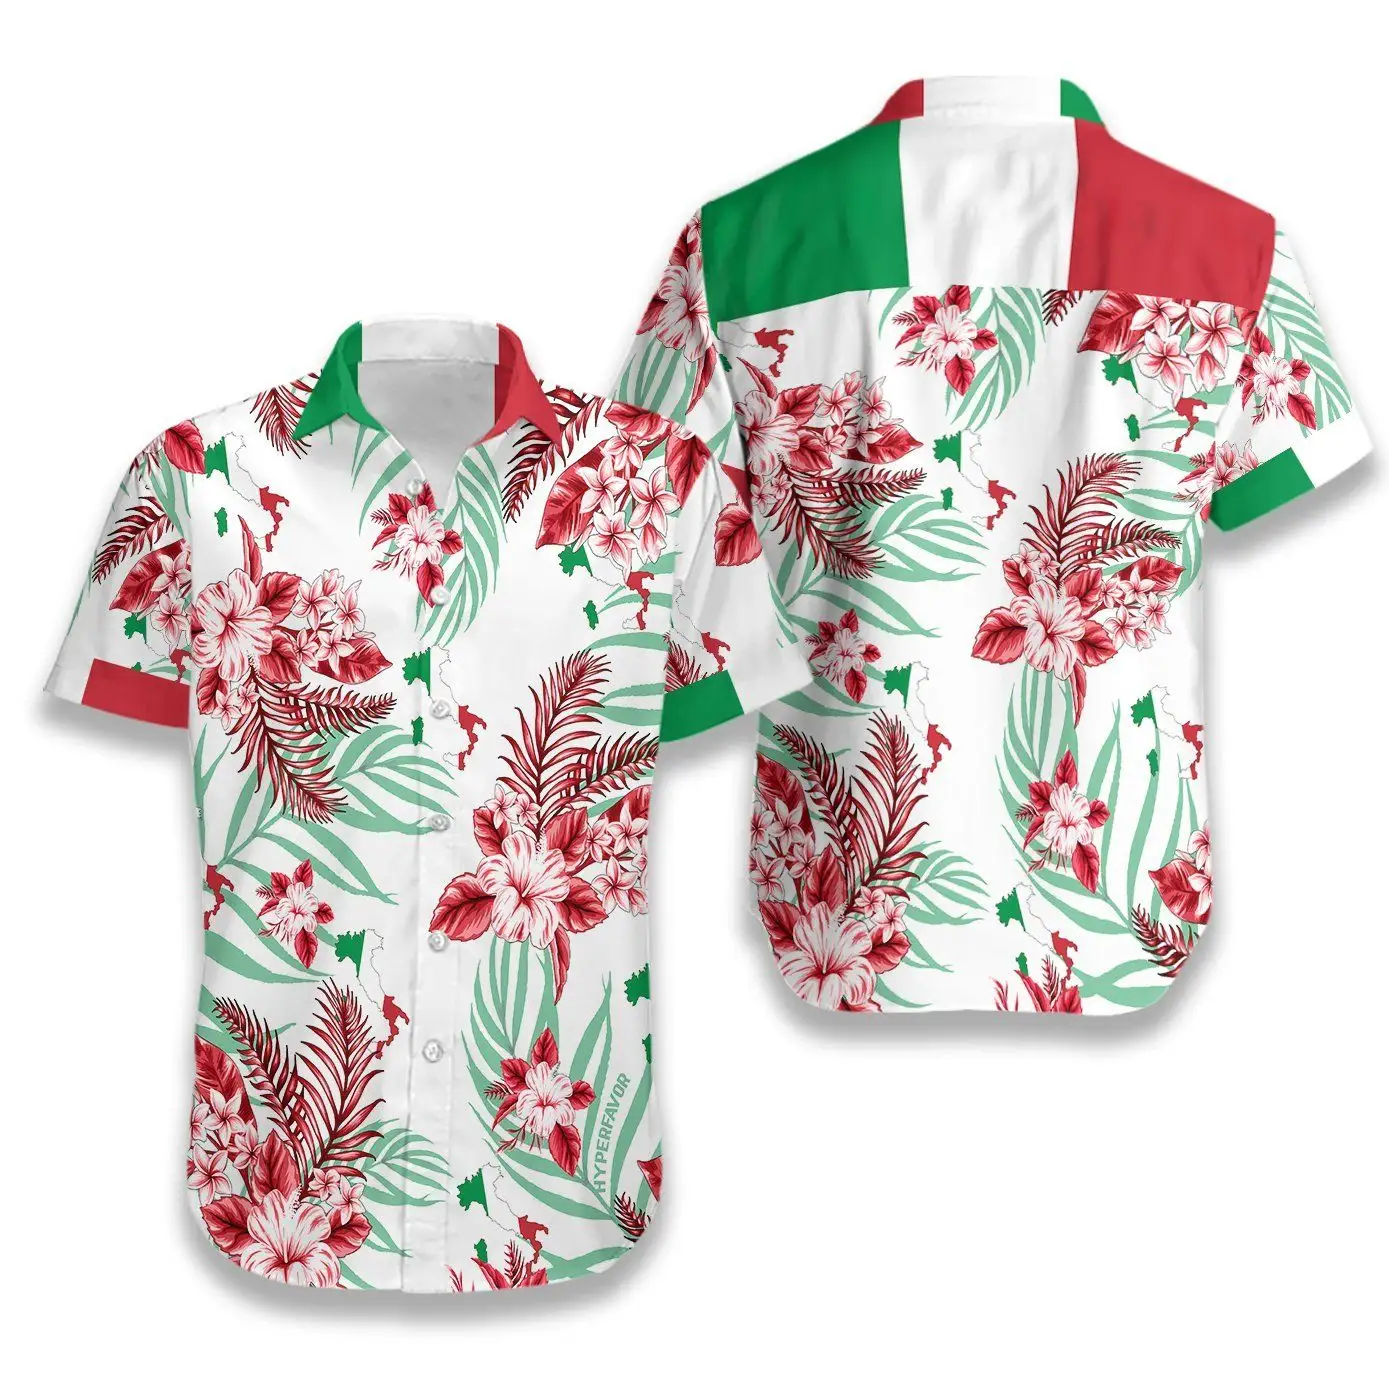 Italy Rugby Hawaiian Shirt for Man Custom Your Design Blouse Short Sleeve Lapel Men's Summer Breathable Shirts Low Price Clothes